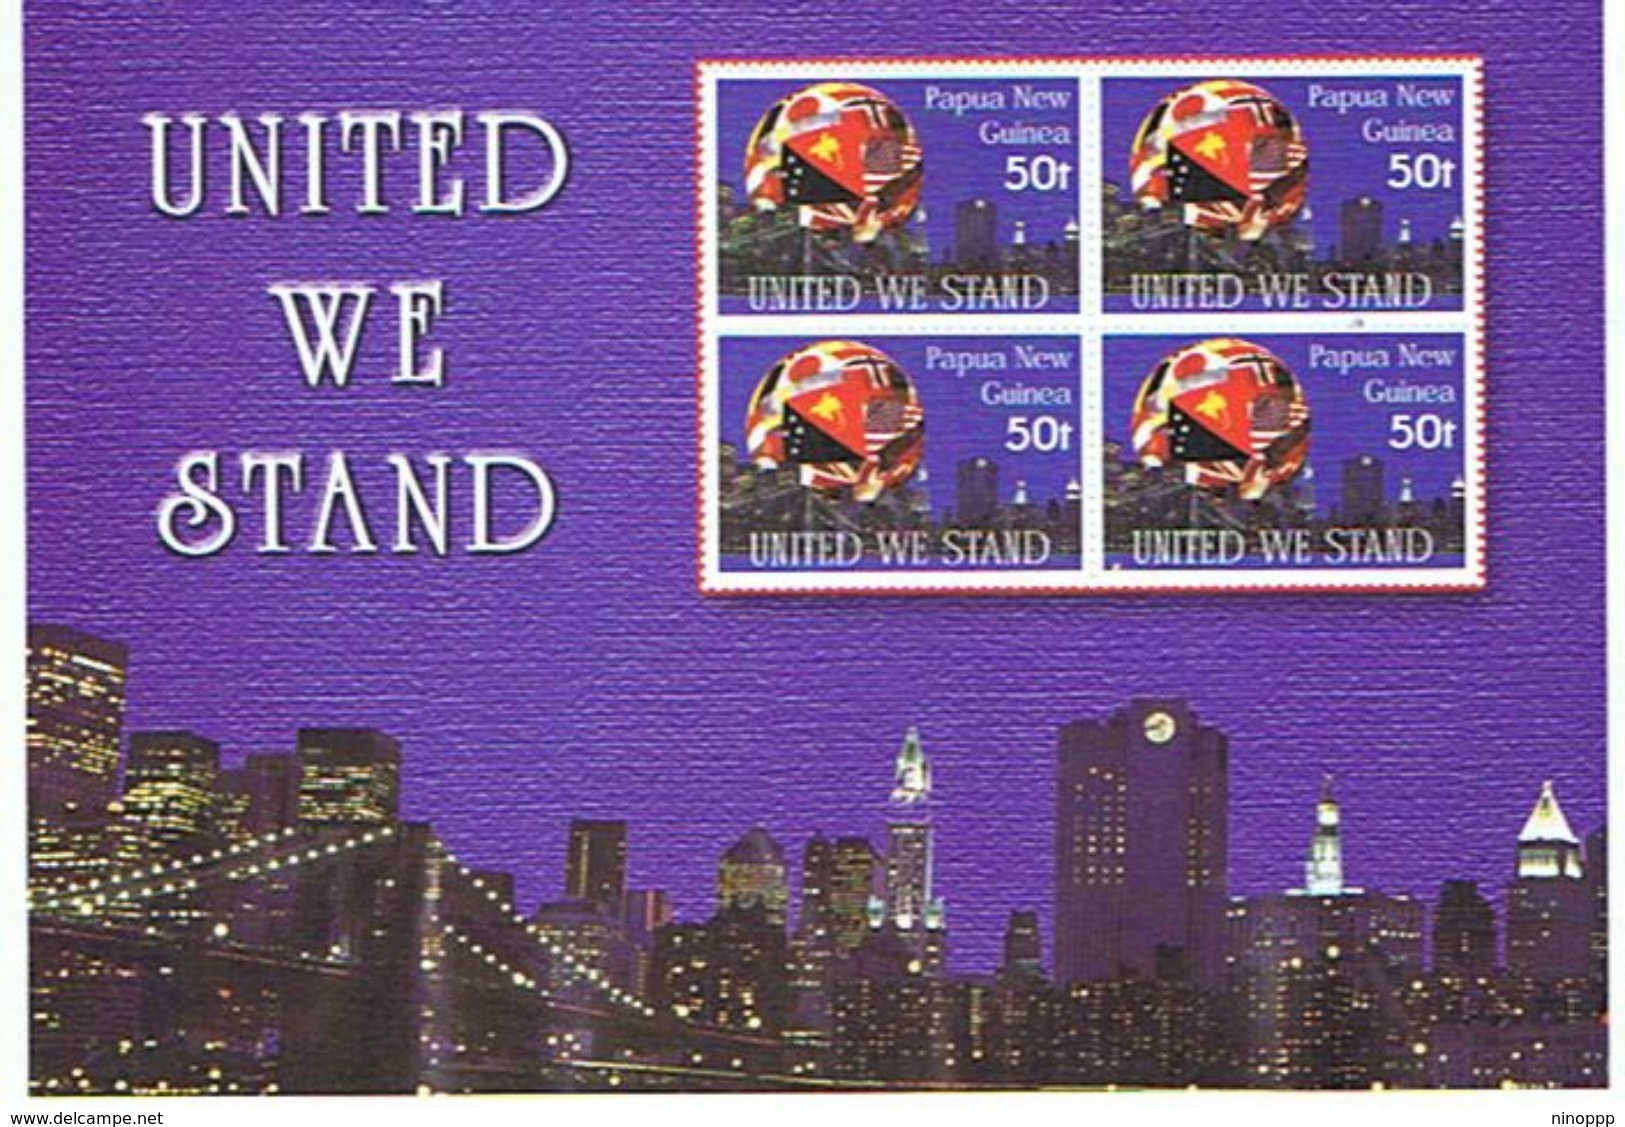 Papua New Guinea SG 947 MS 2002 United We Stand MS MNH - Papouasie-Nouvelle-Guinée